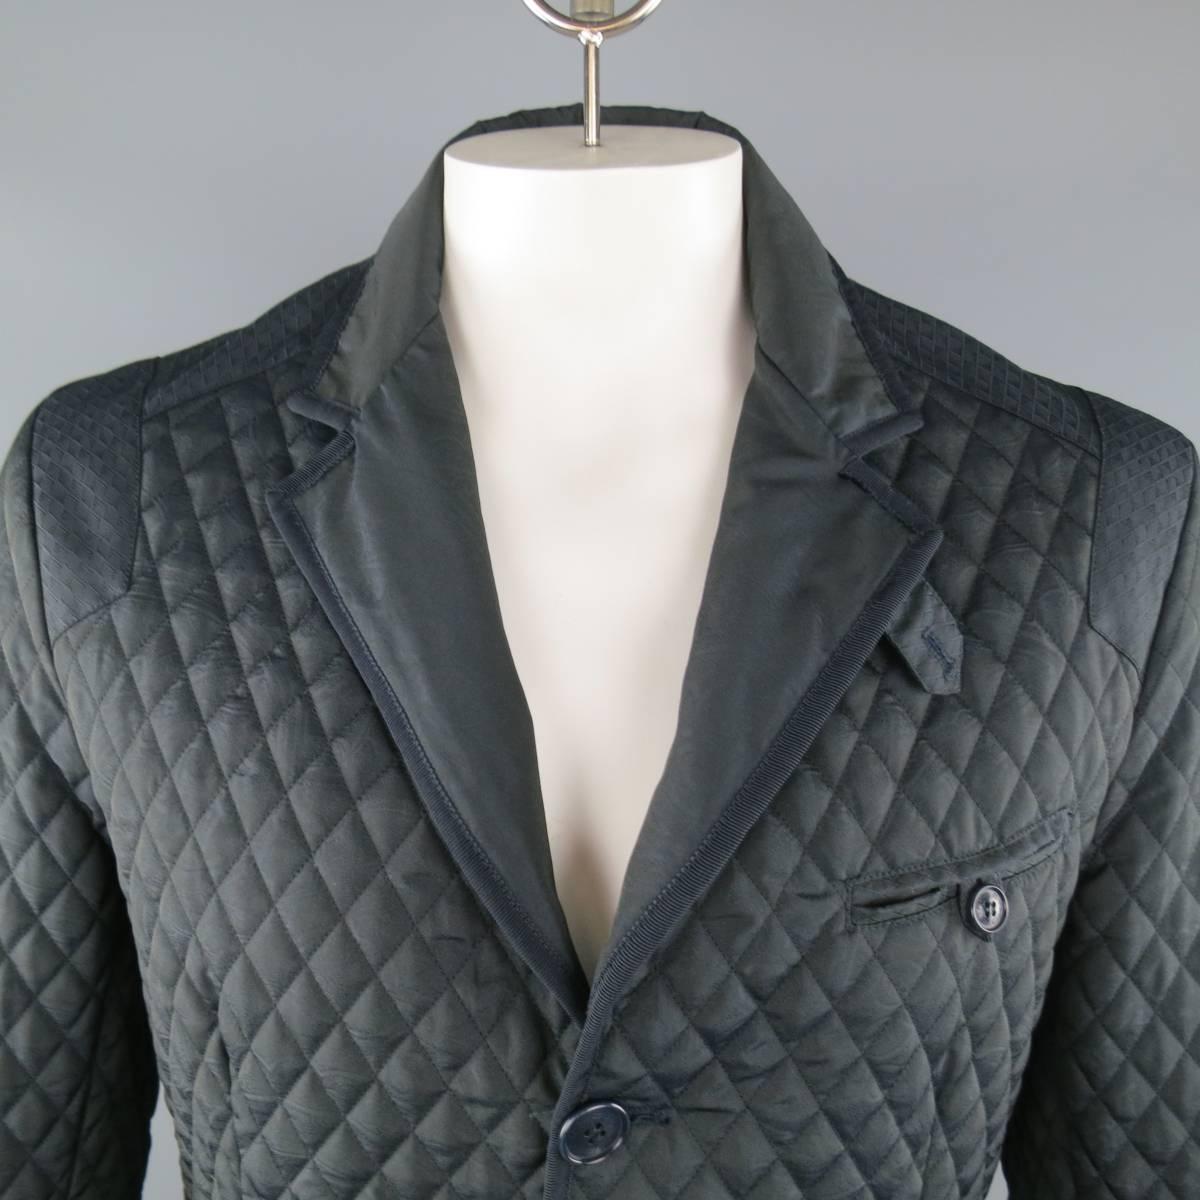 ETRO sport coat style jacket comes in a deep midnight navy blue quilted nylon with subtle paisley print and features a notch lapel, diamond pattern shoulder panels, faille piping, flap patch pockets, and paisley silk lining. Made in Italy.
